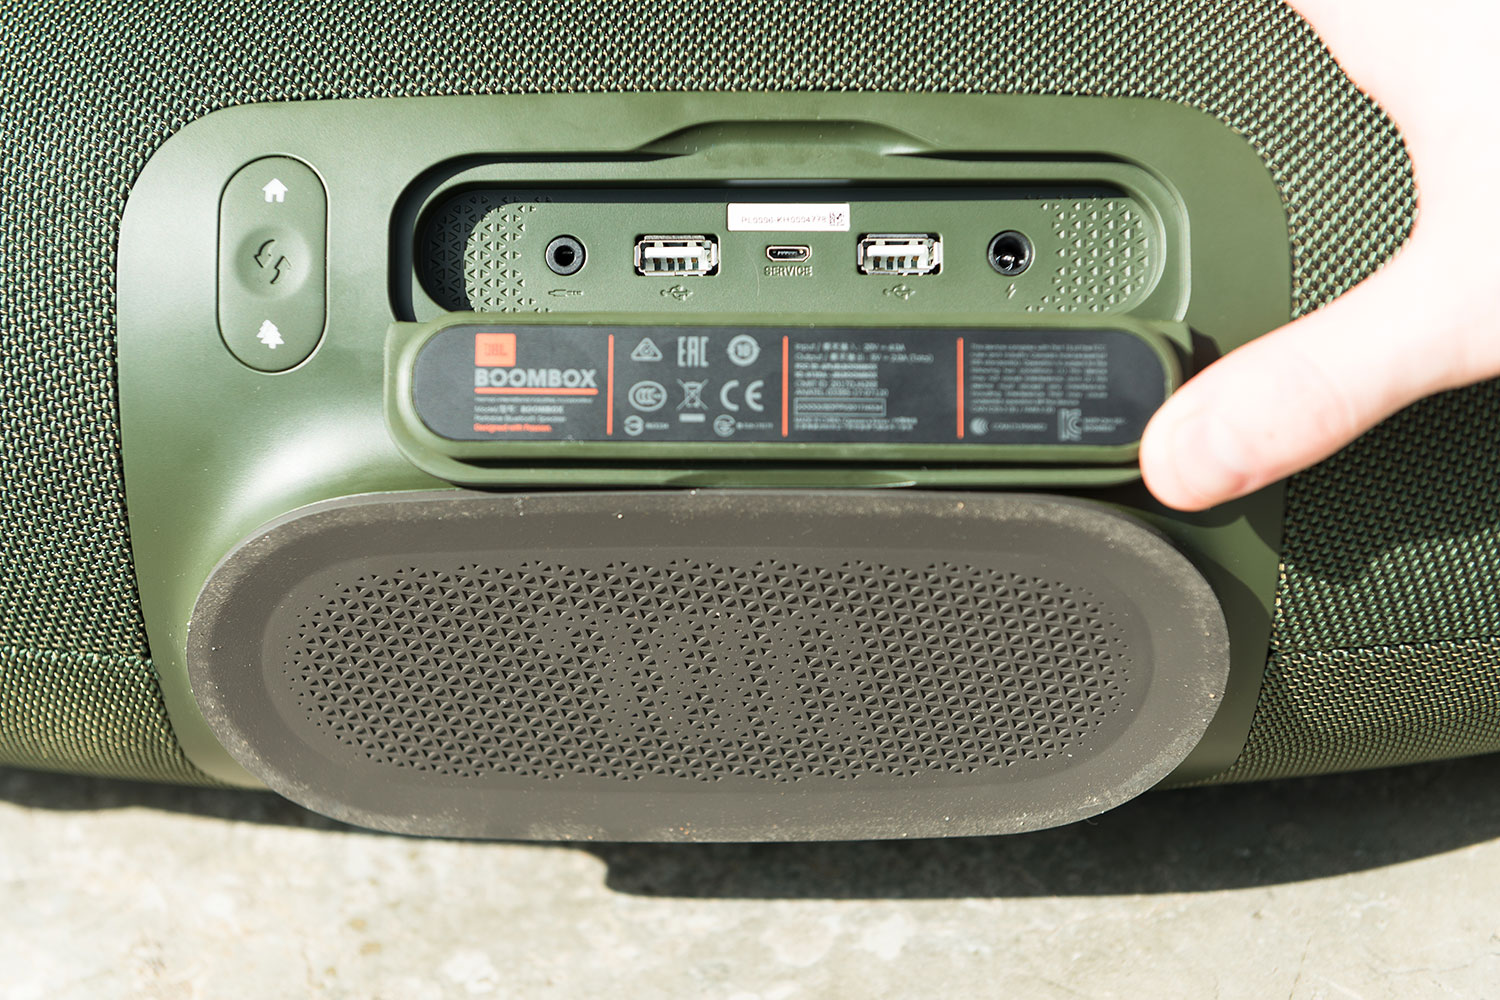 Boombox Review | Digital Trends